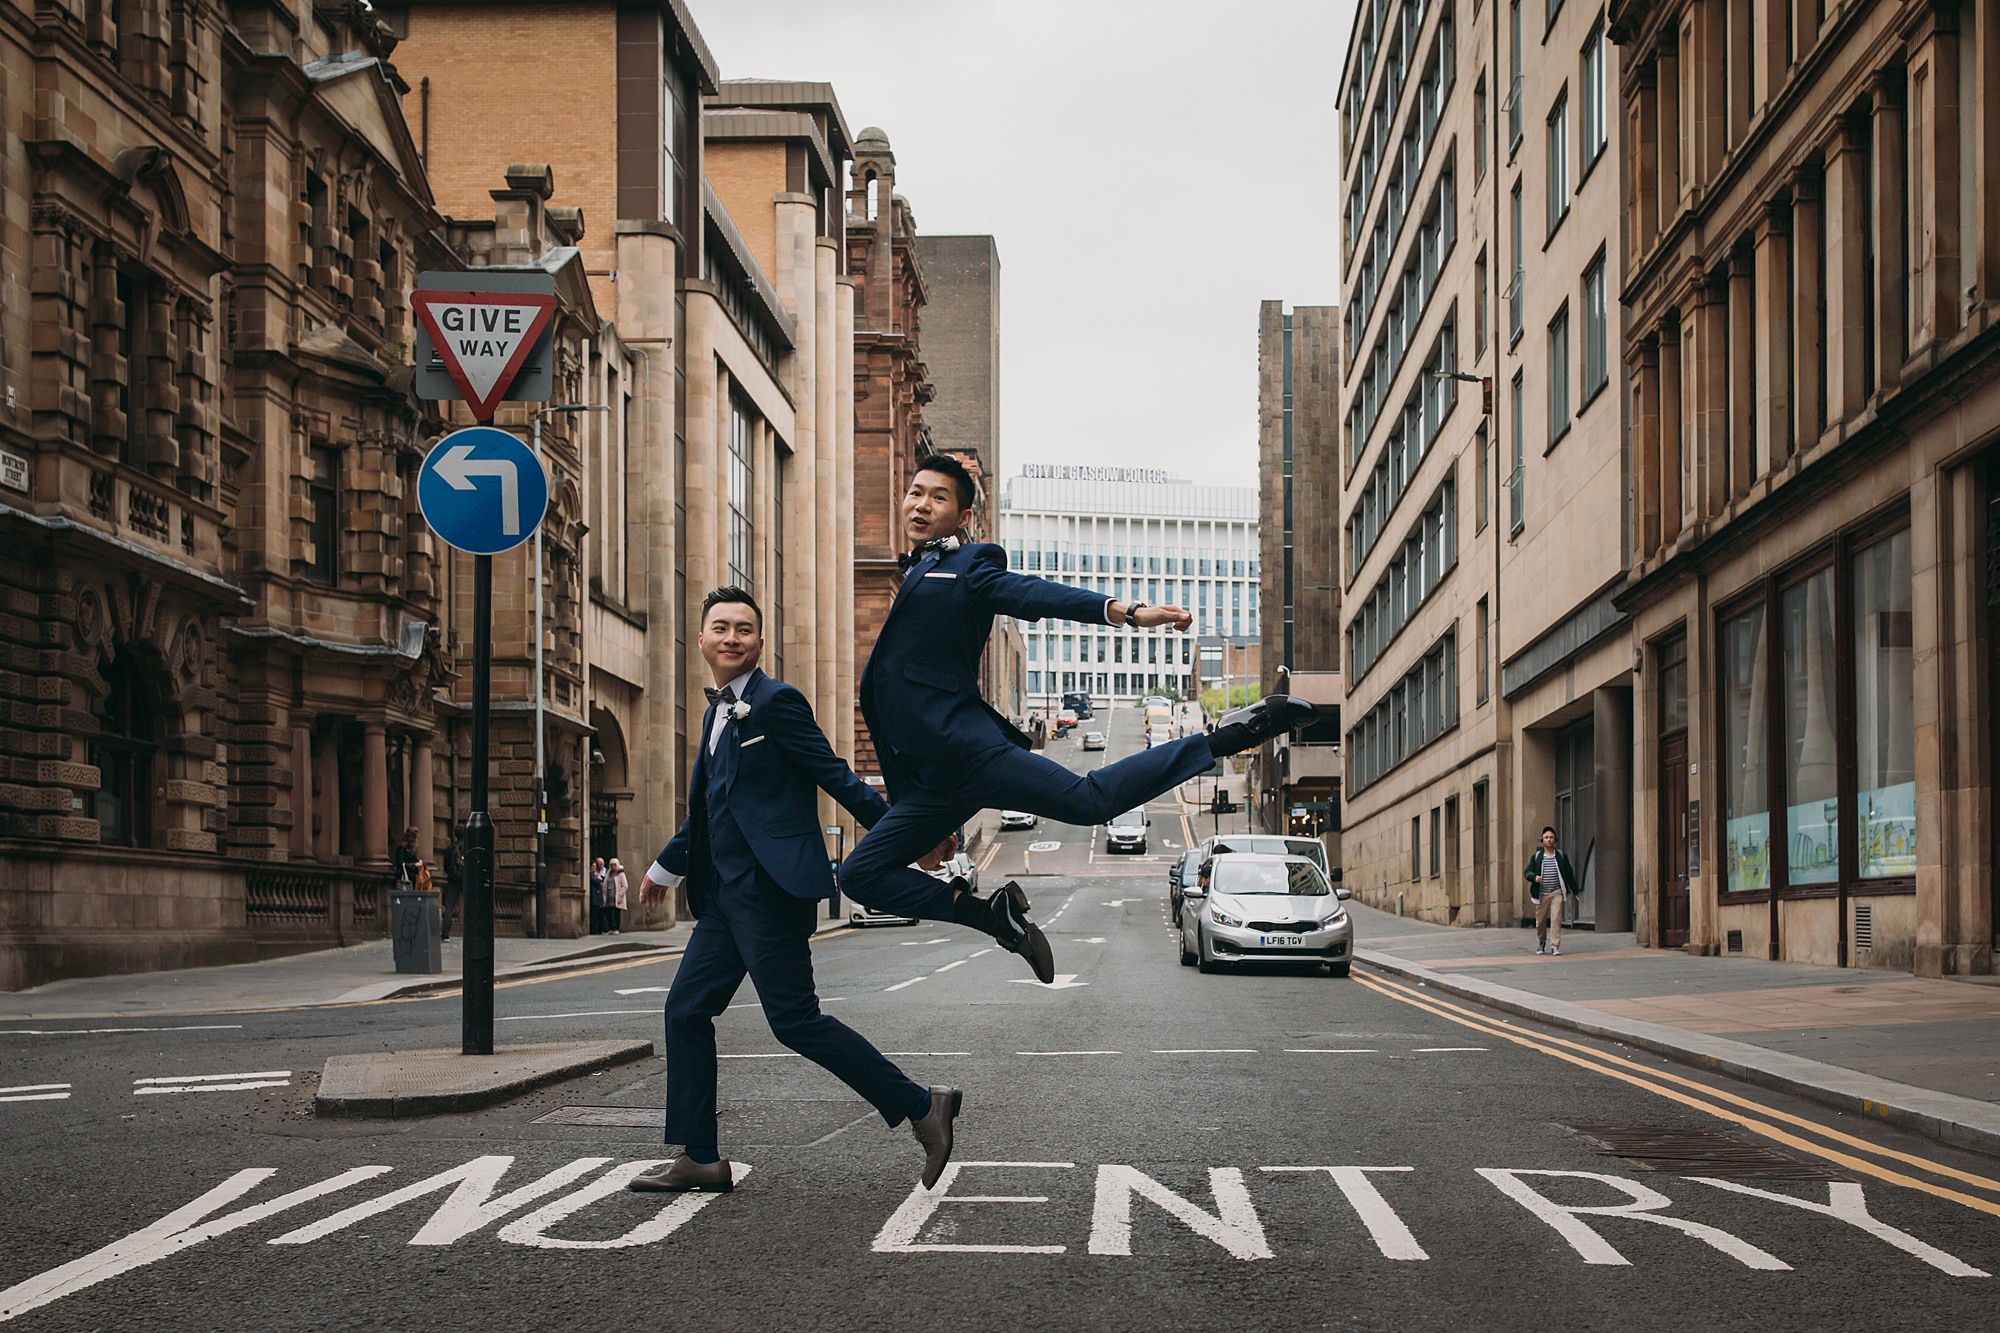 Two grooms cross the street during their Glasgow elopement. One of the grooms is a dancer and leaps into the air in celebration!